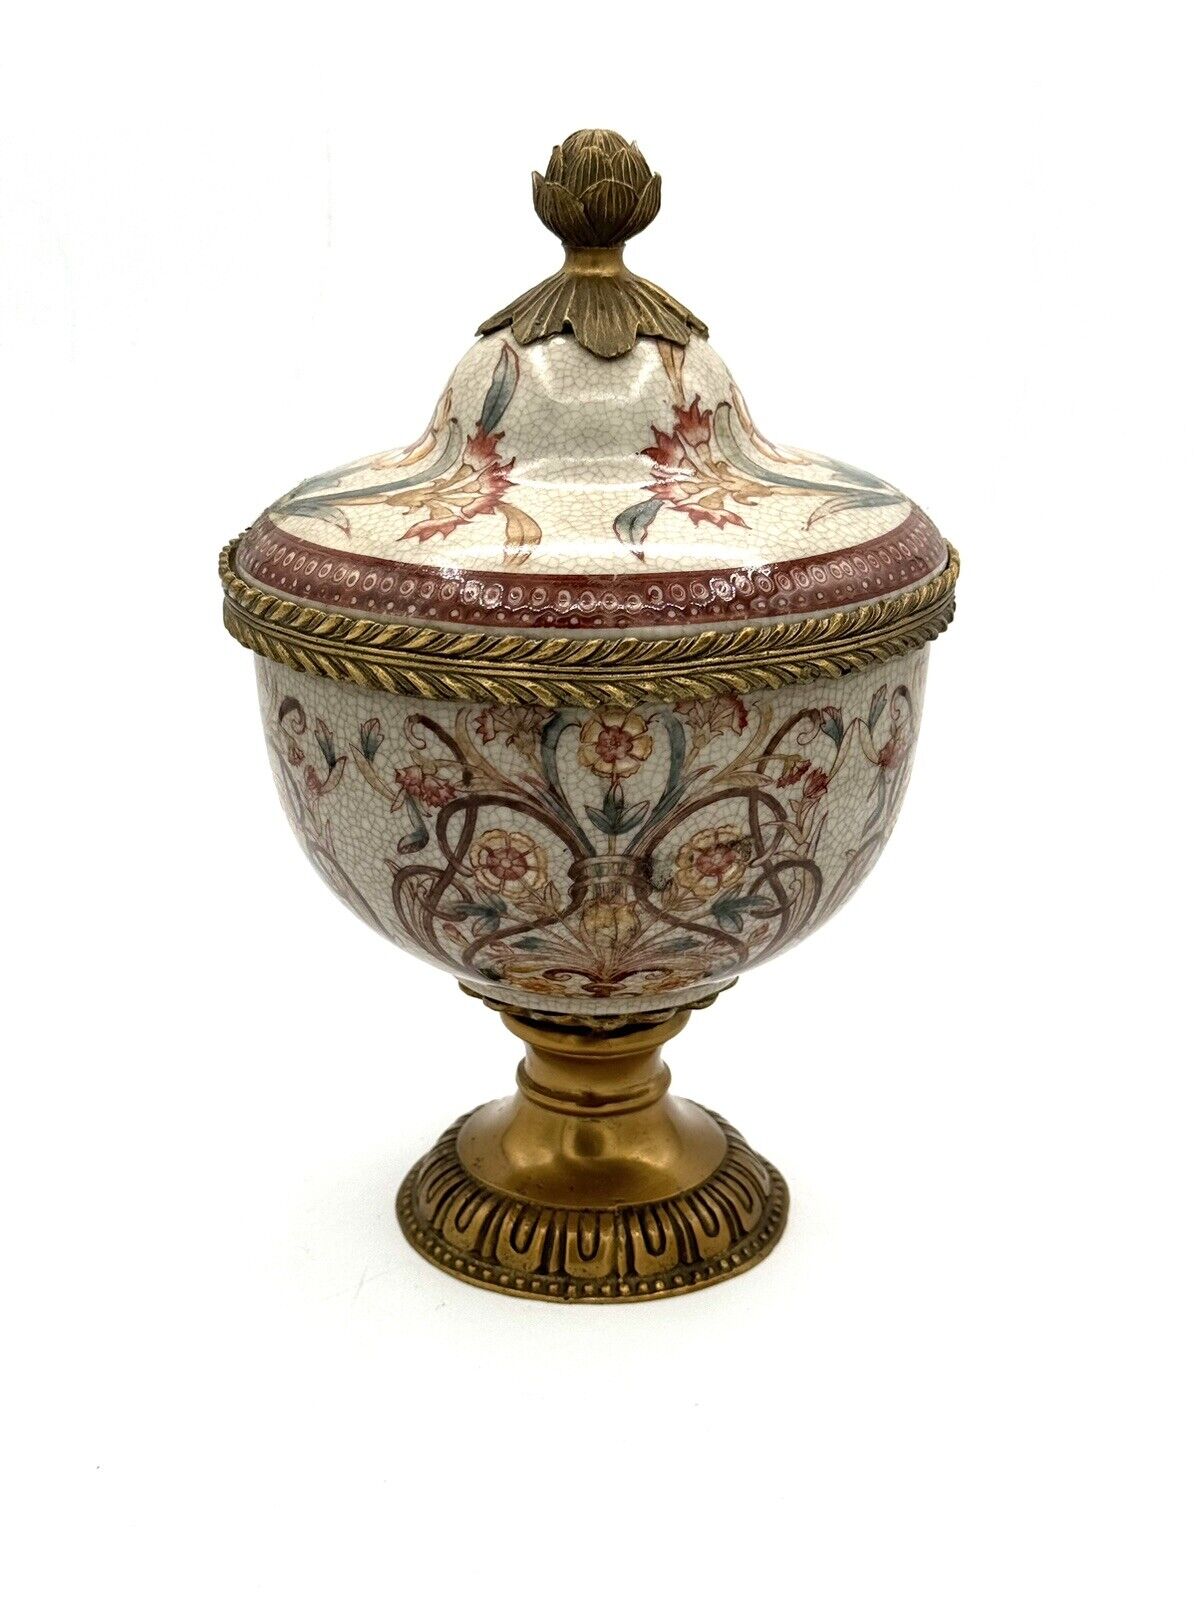 Ornate Decorative Porcelain and Bronze Urn with Lid Decorative